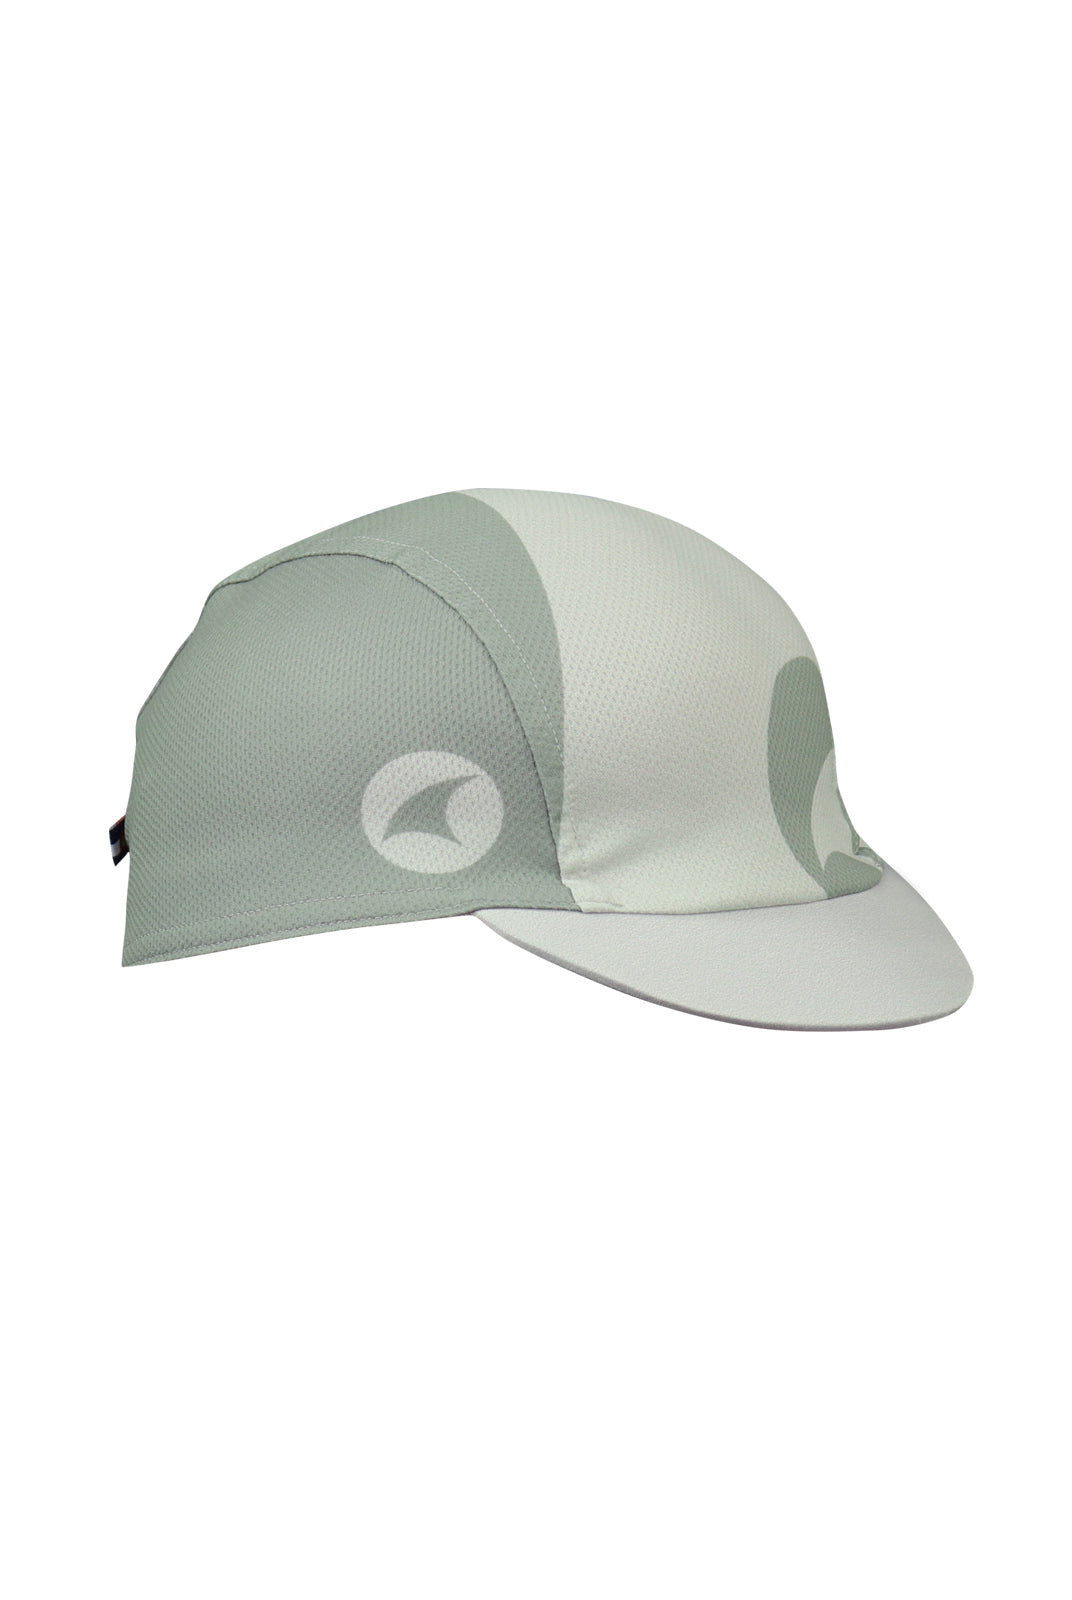 White Cycling Cap - Right View